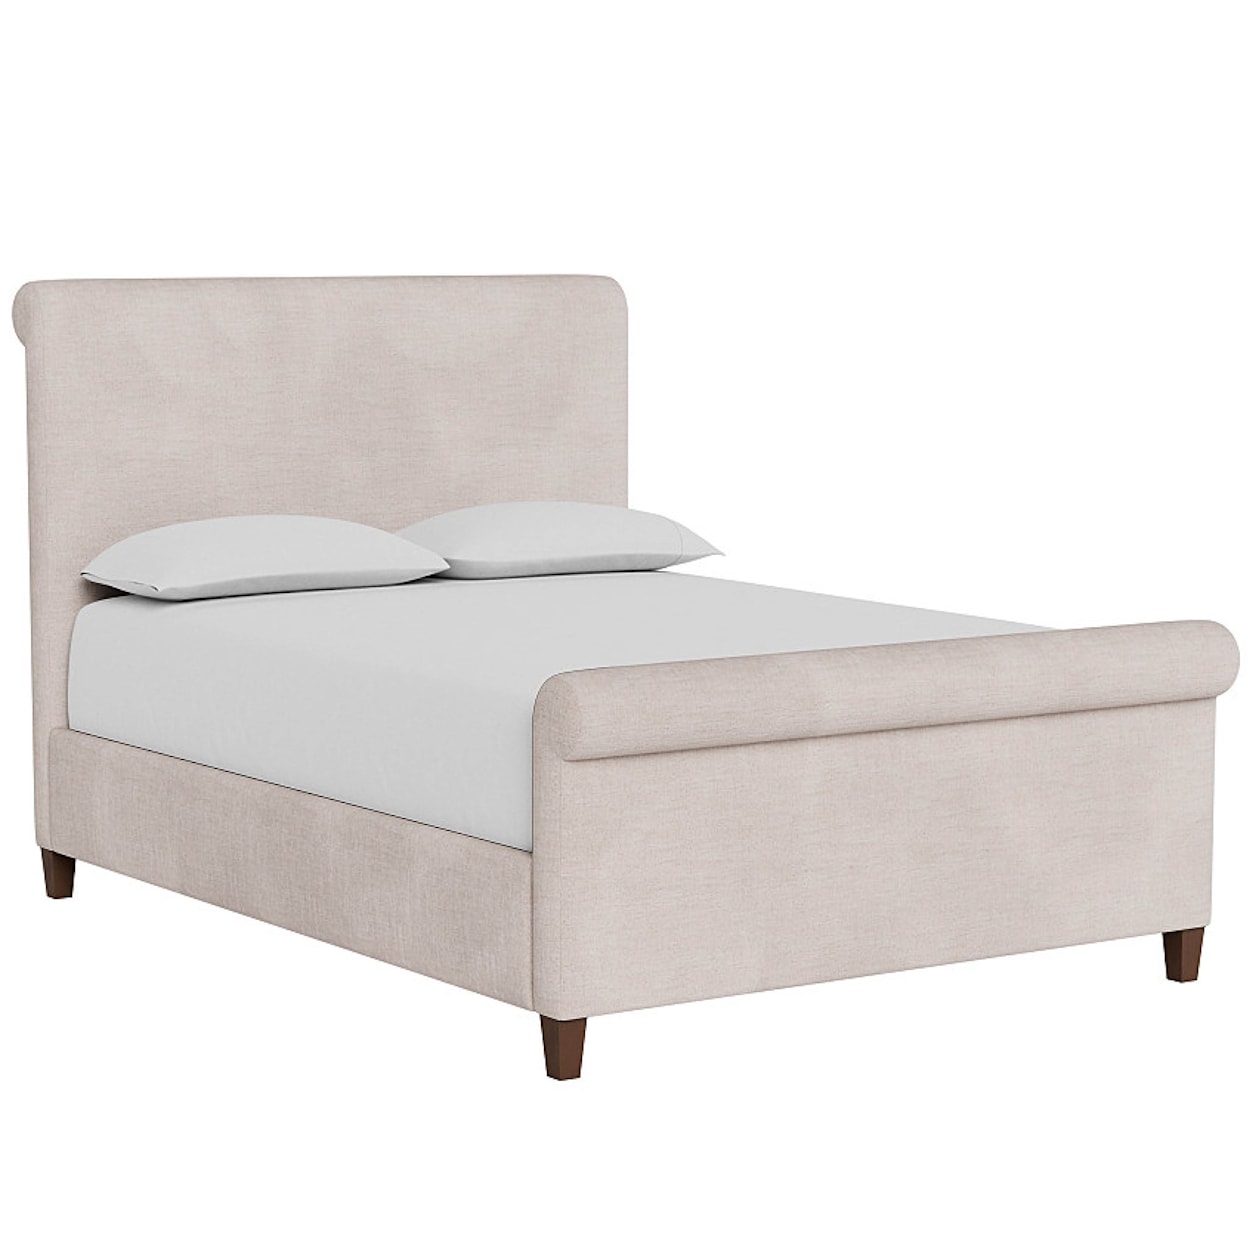 Universal Special Order Queen Cape May Bed